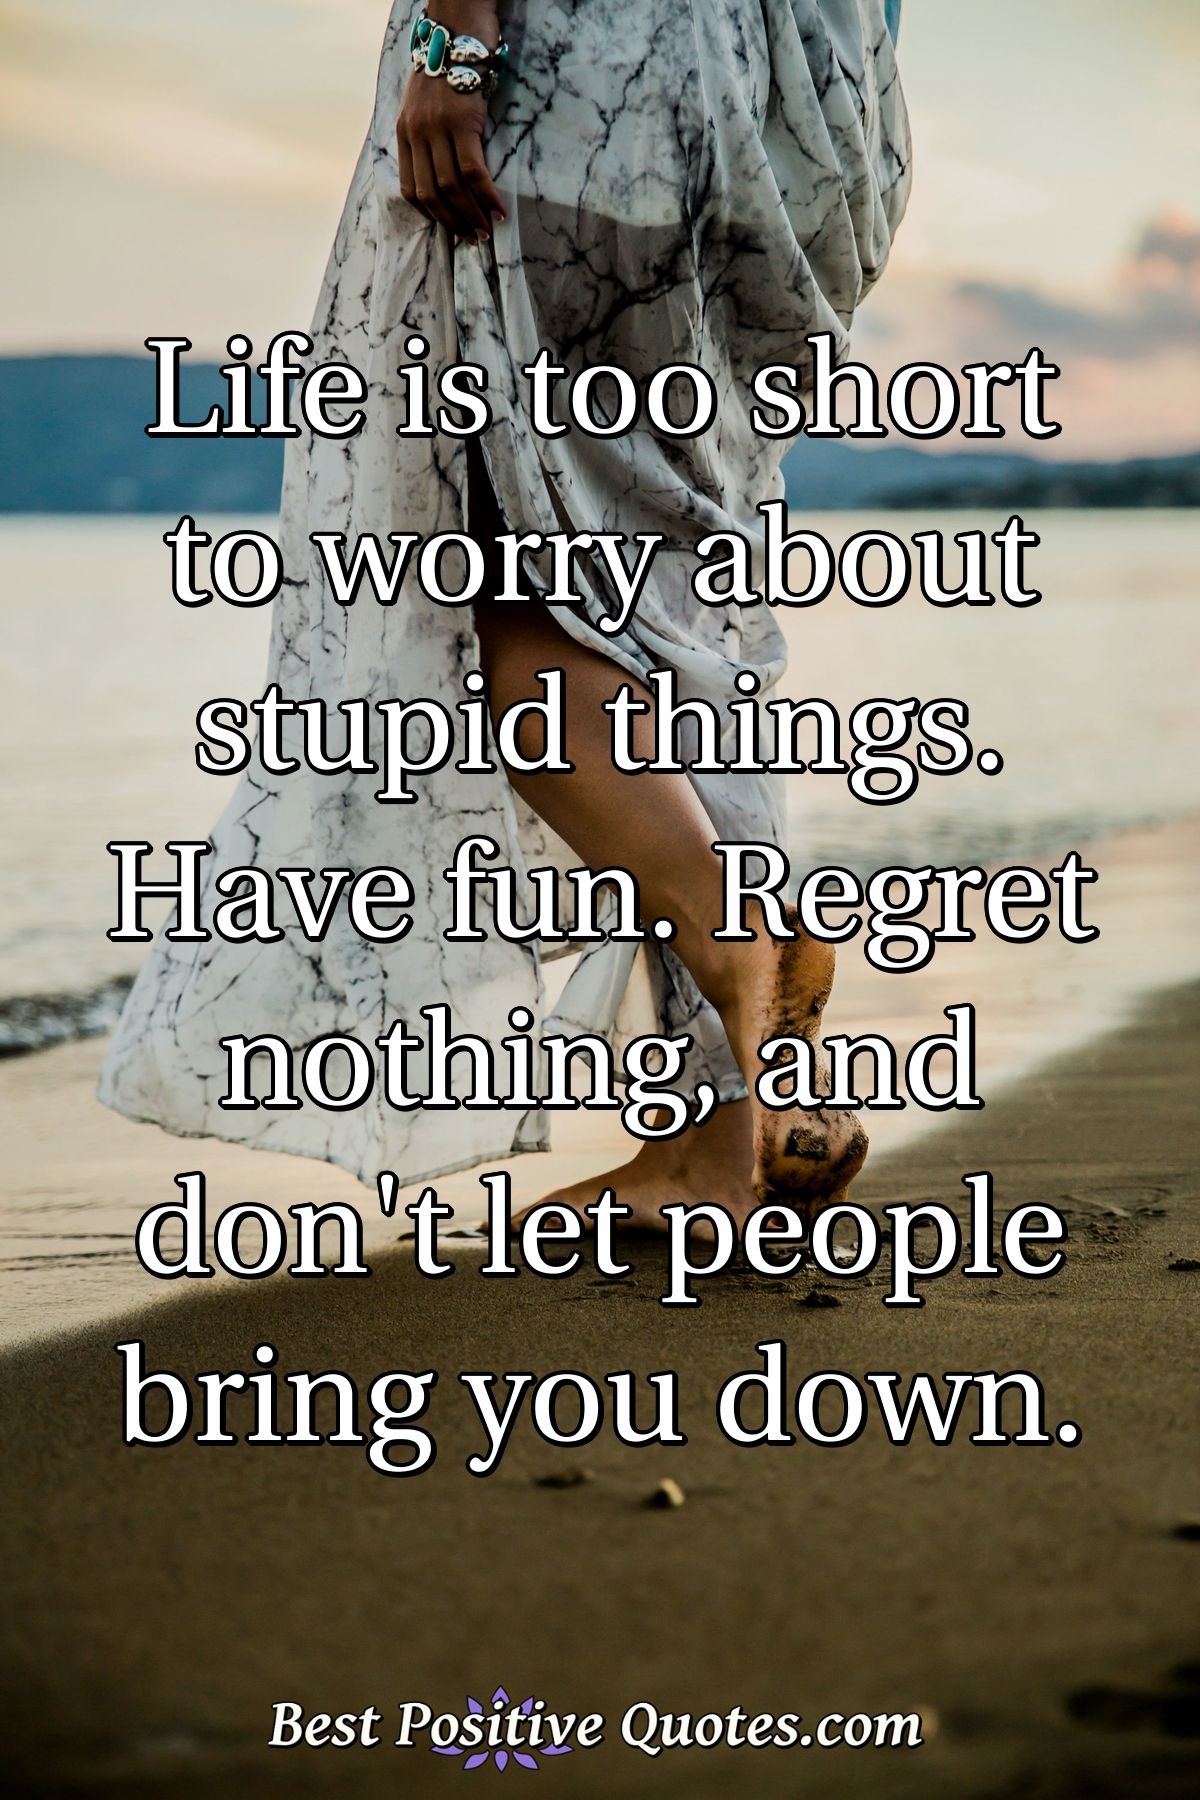 Life is too short to worry about stupid things. Have fun. Regret nothing, and don't let people bring you down. - Anonymous